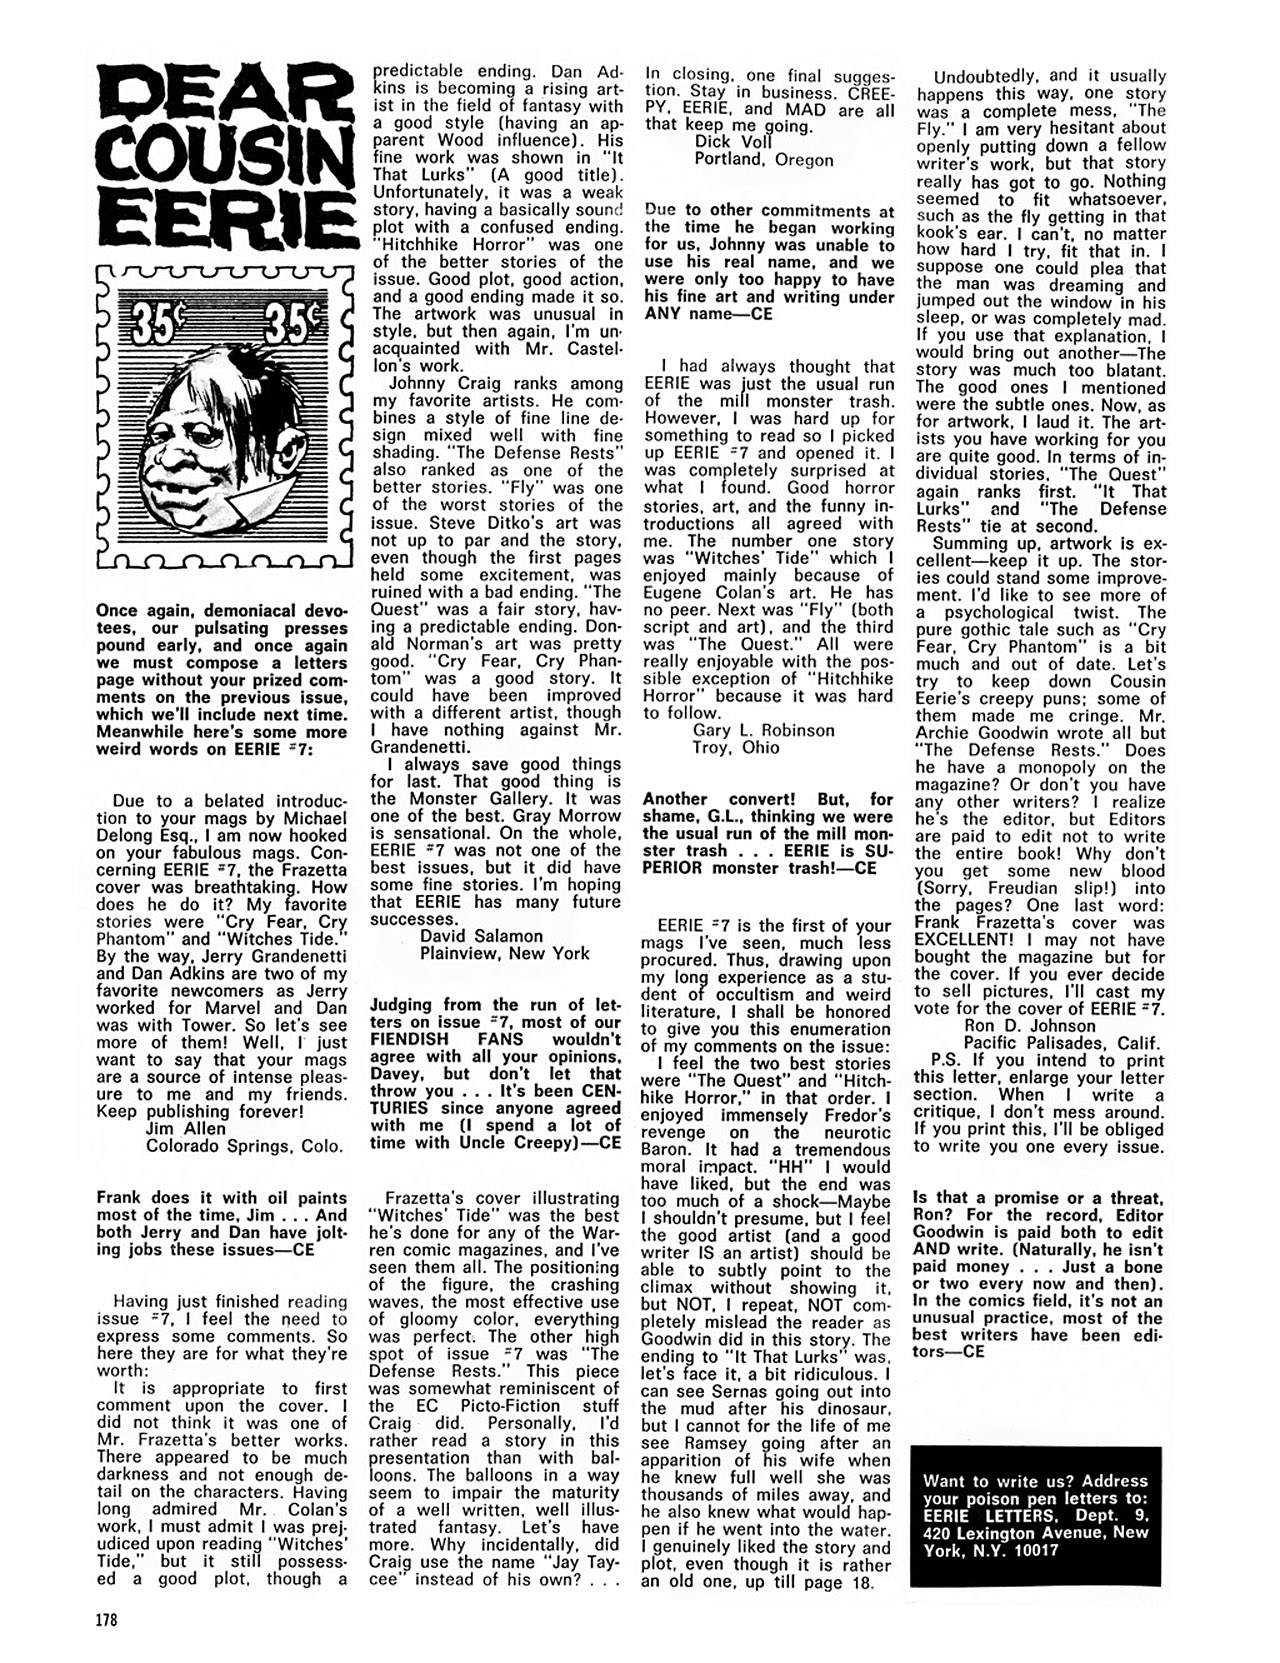 Read online Eerie Archives comic -  Issue # TPB 2 - 179